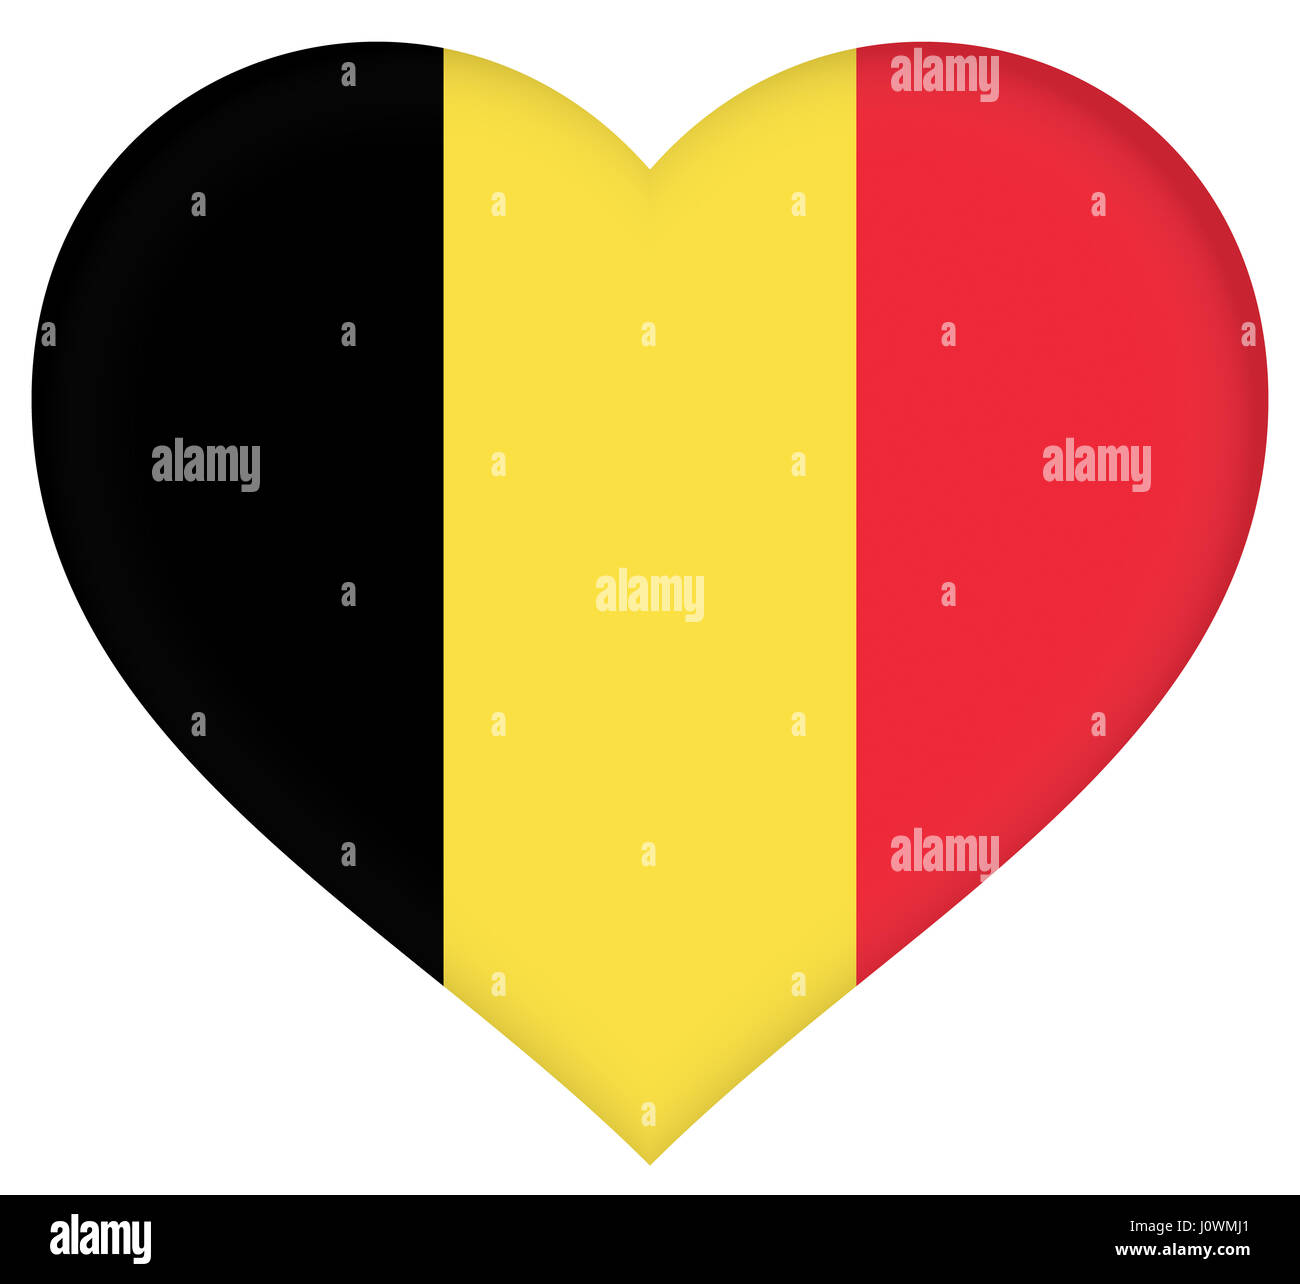 Illustration of the flag of Belgium with a heart shape Stock Photo